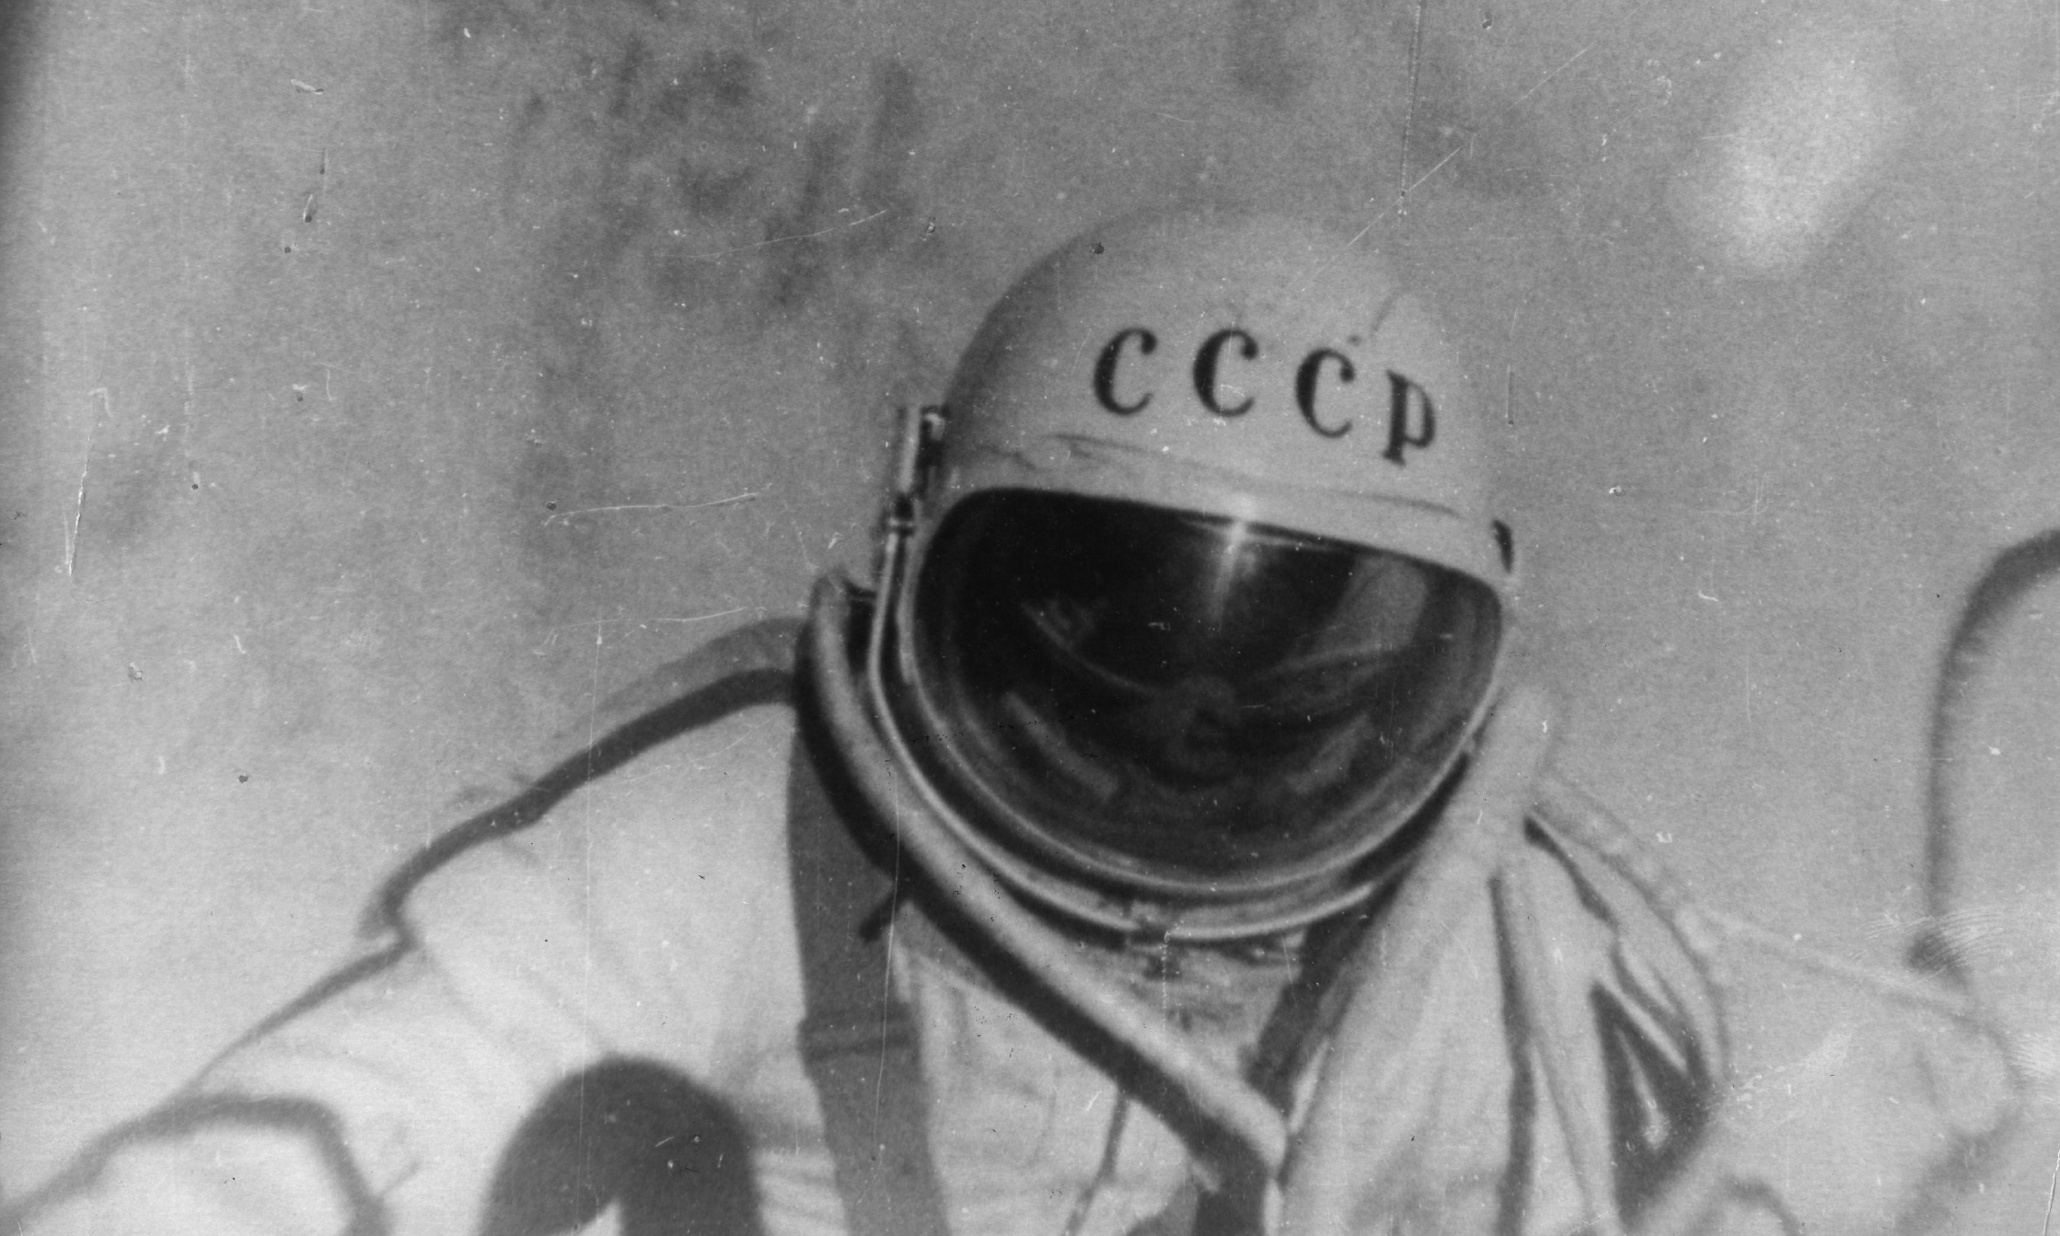 8th August 1965: A still from a documentary film 'The Man Walking In Space', which followed Russian astronaut Alexei Arkhipovich Leonov on his famous orbit in the spacecraft Voskhod 2. On 18th March 1965, Leonov left the spacecraft for ten minutes to become the first man ever to walk in space. (Photo by Central Press/Getty Images)